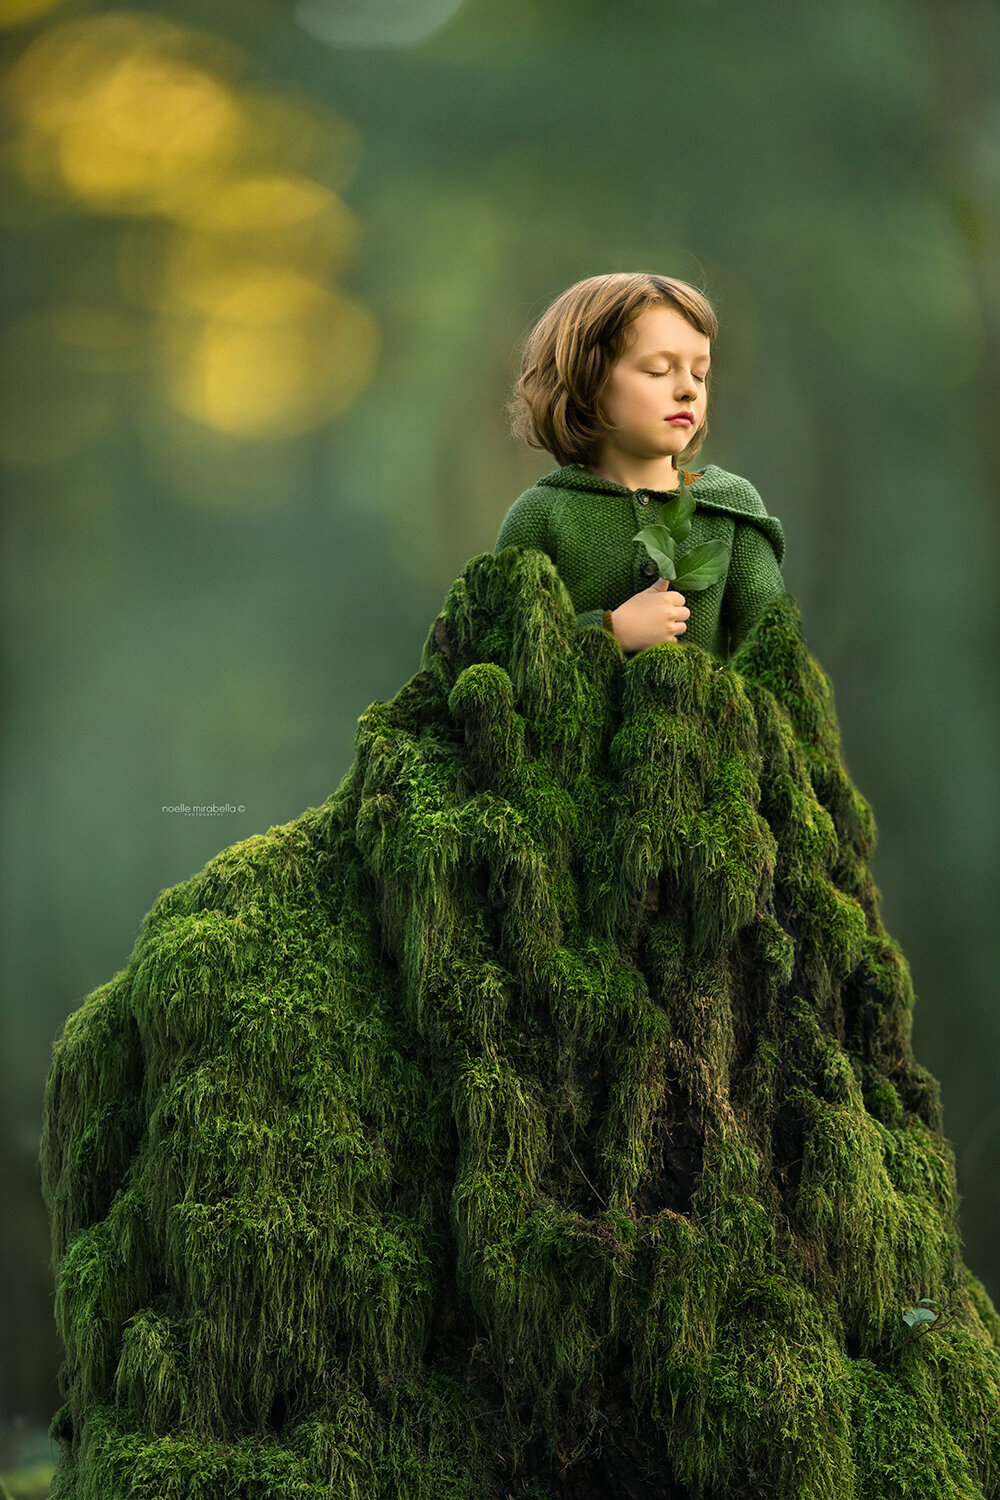 Child in a mossy forest standing on a mossy stump.